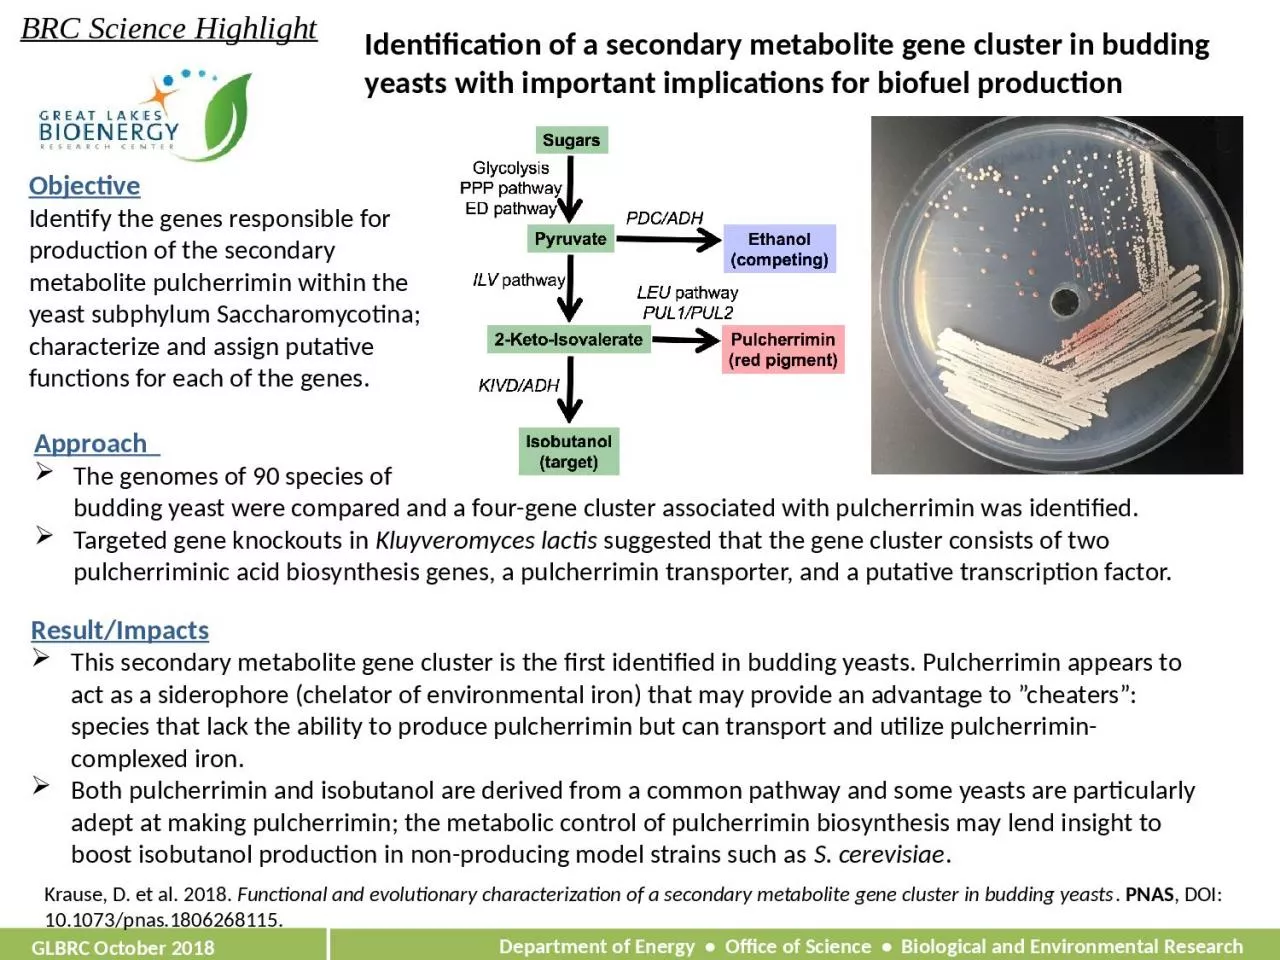 Identification of a secondary metabolite gene cluster in budding yeasts with important